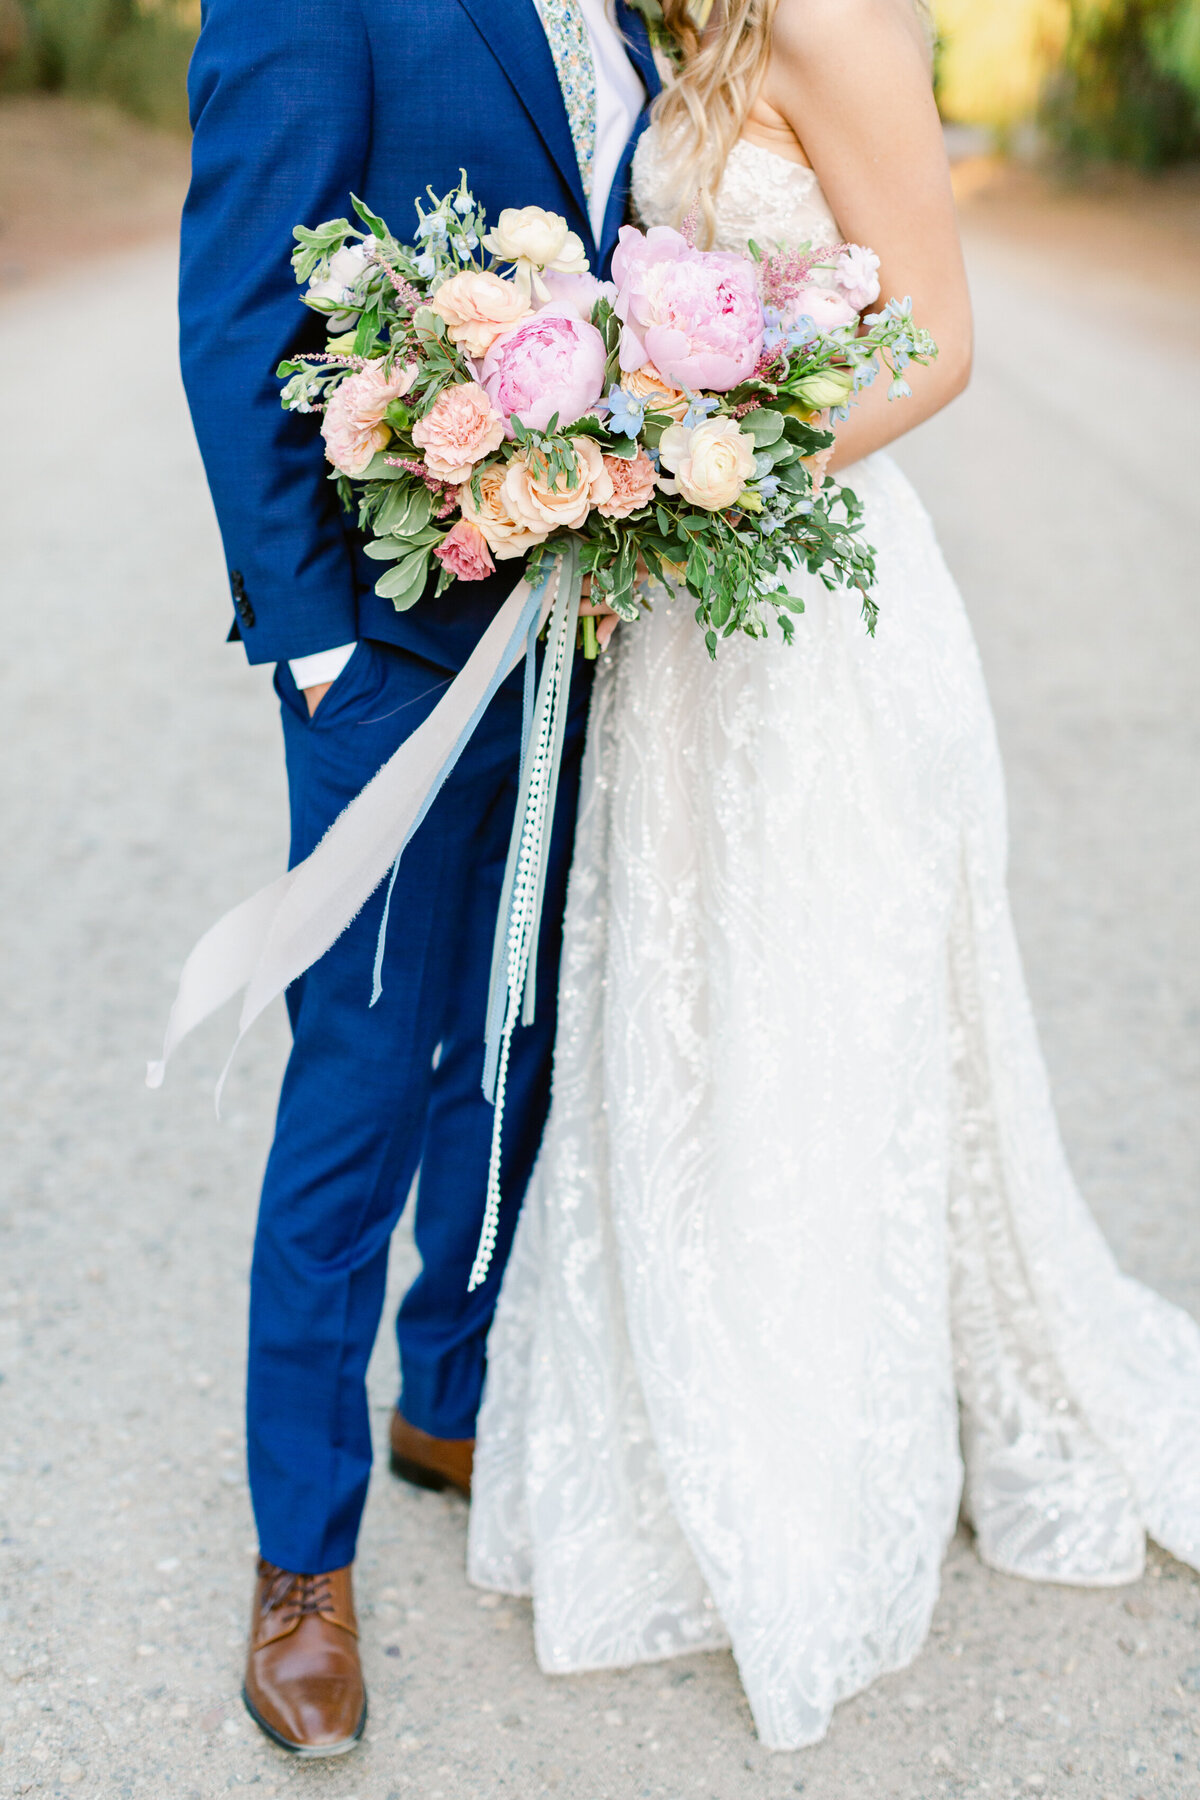 This pastel color palette for a floral bouquet highlights peonies.